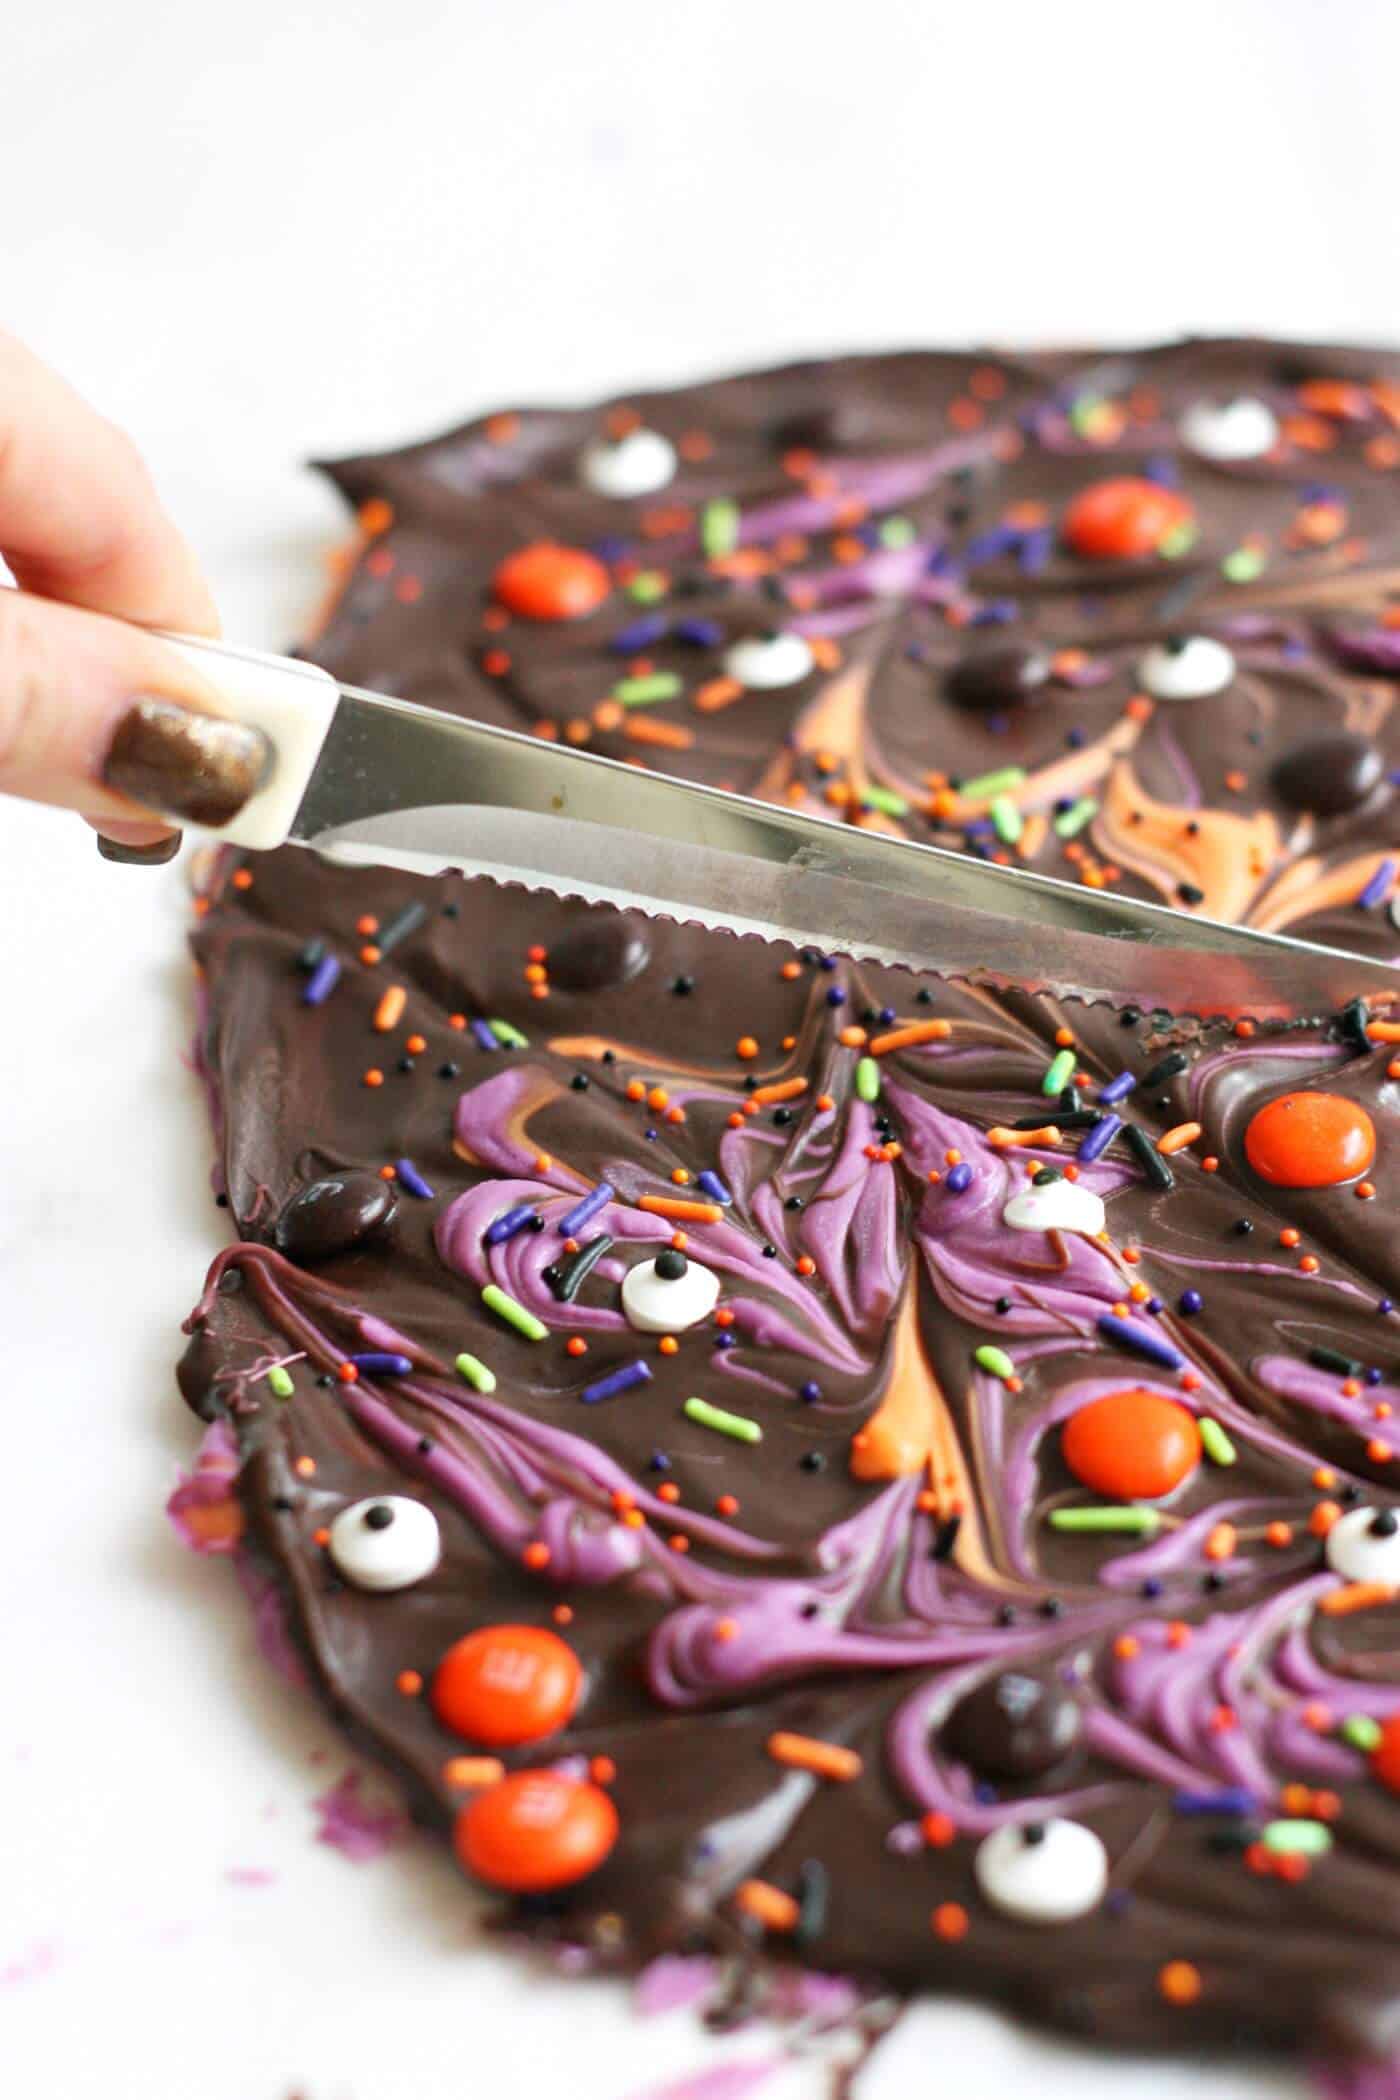 Cutting into the Halloween candy bark